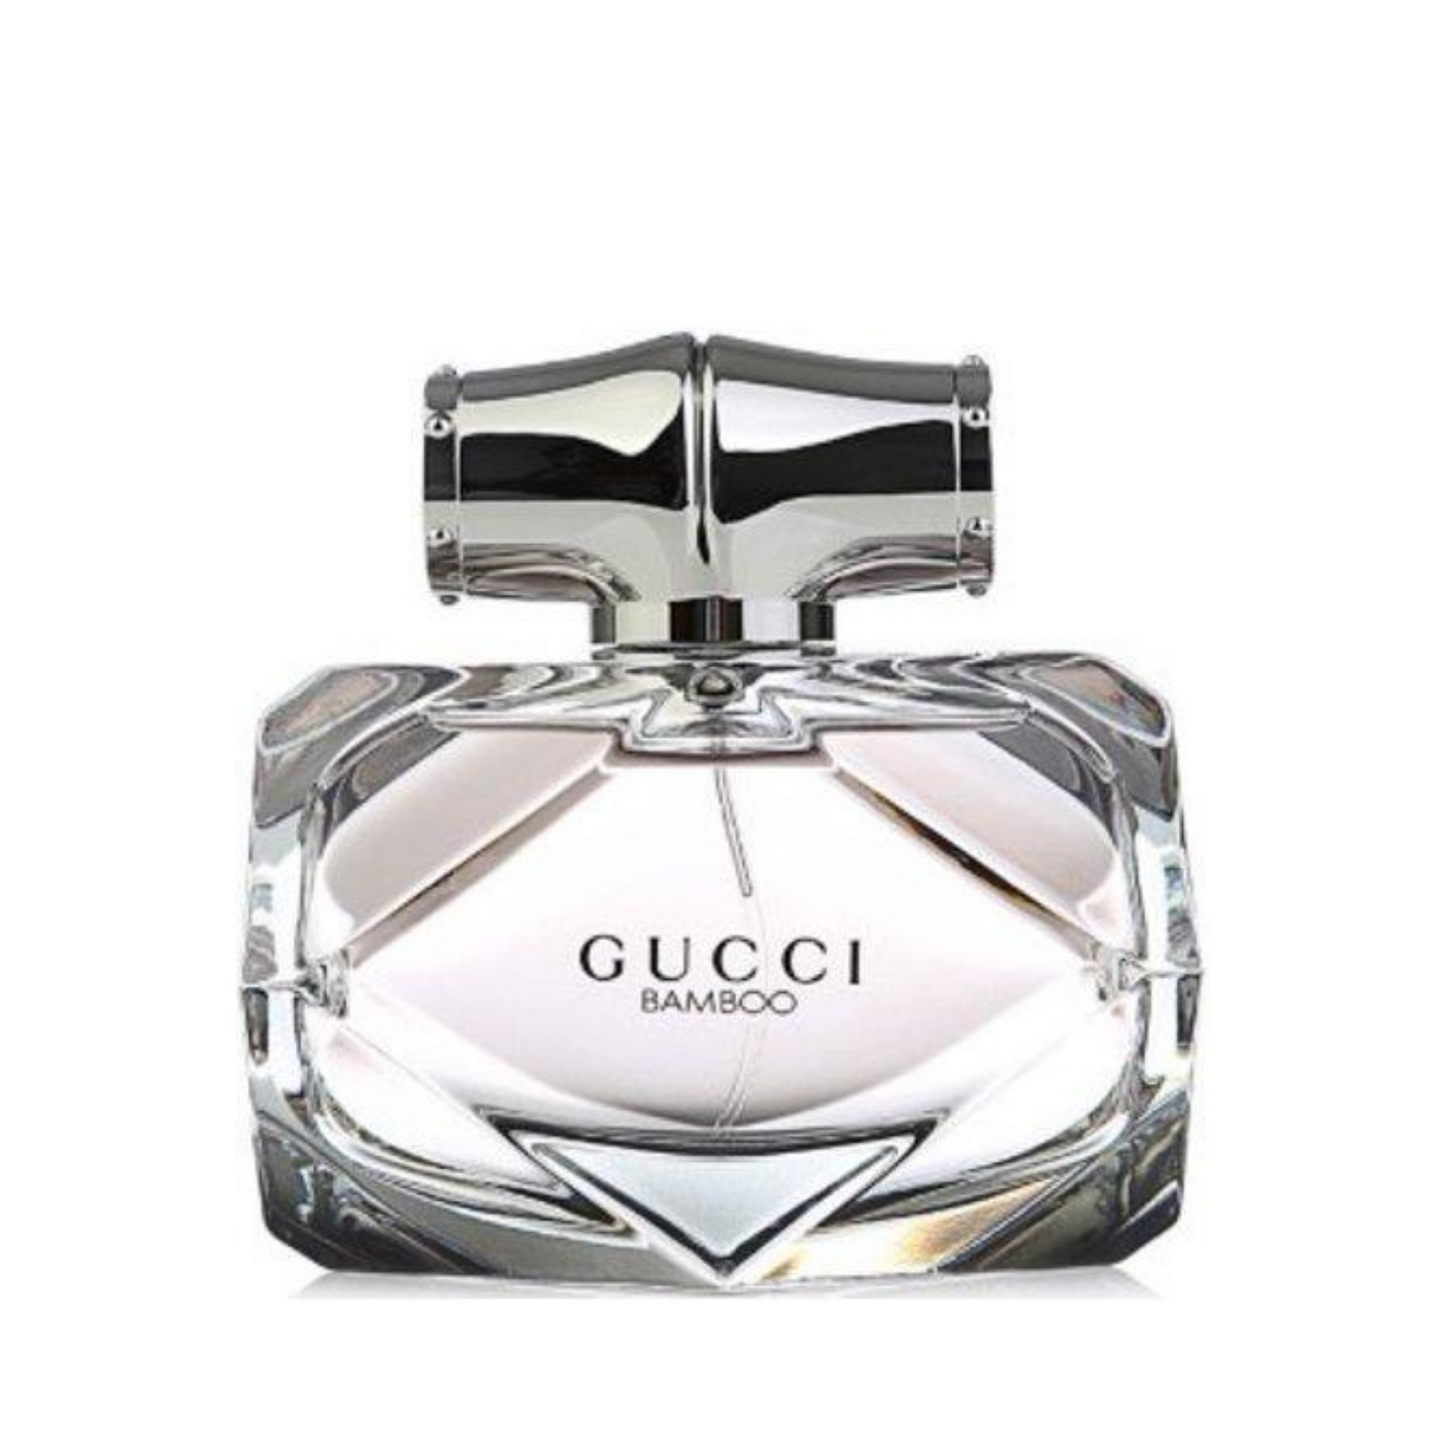 Gucci Bamboo type Perfume for Women